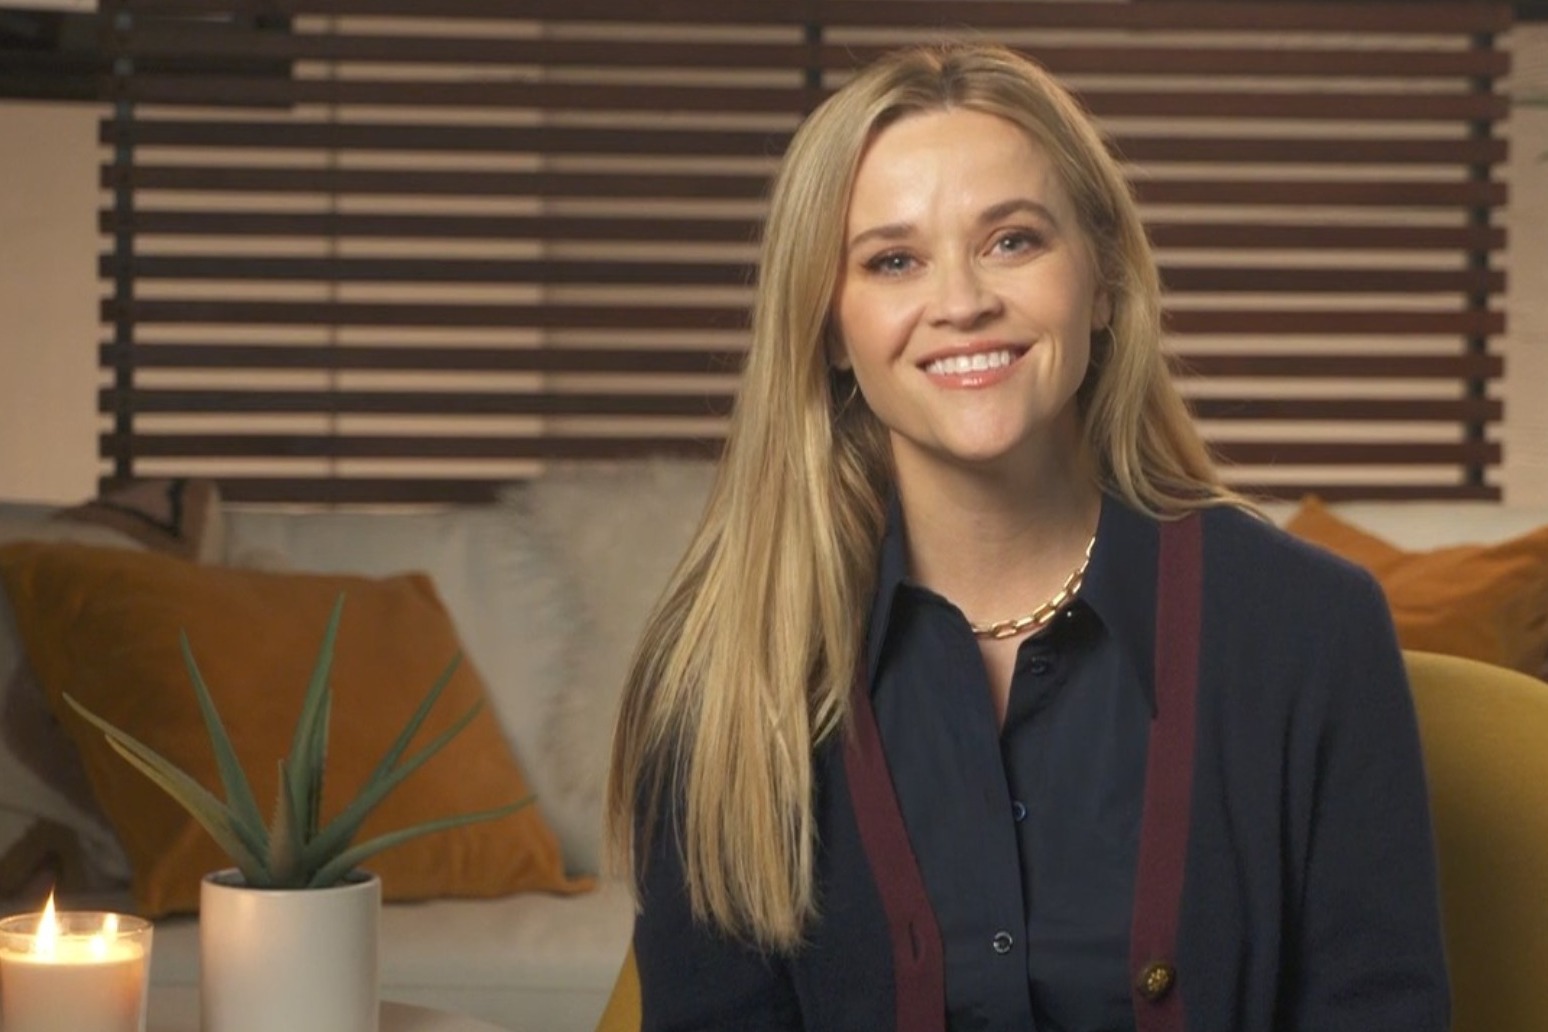 Reese Witherspoon to read CBeebies bedtime story about life’s special moments 